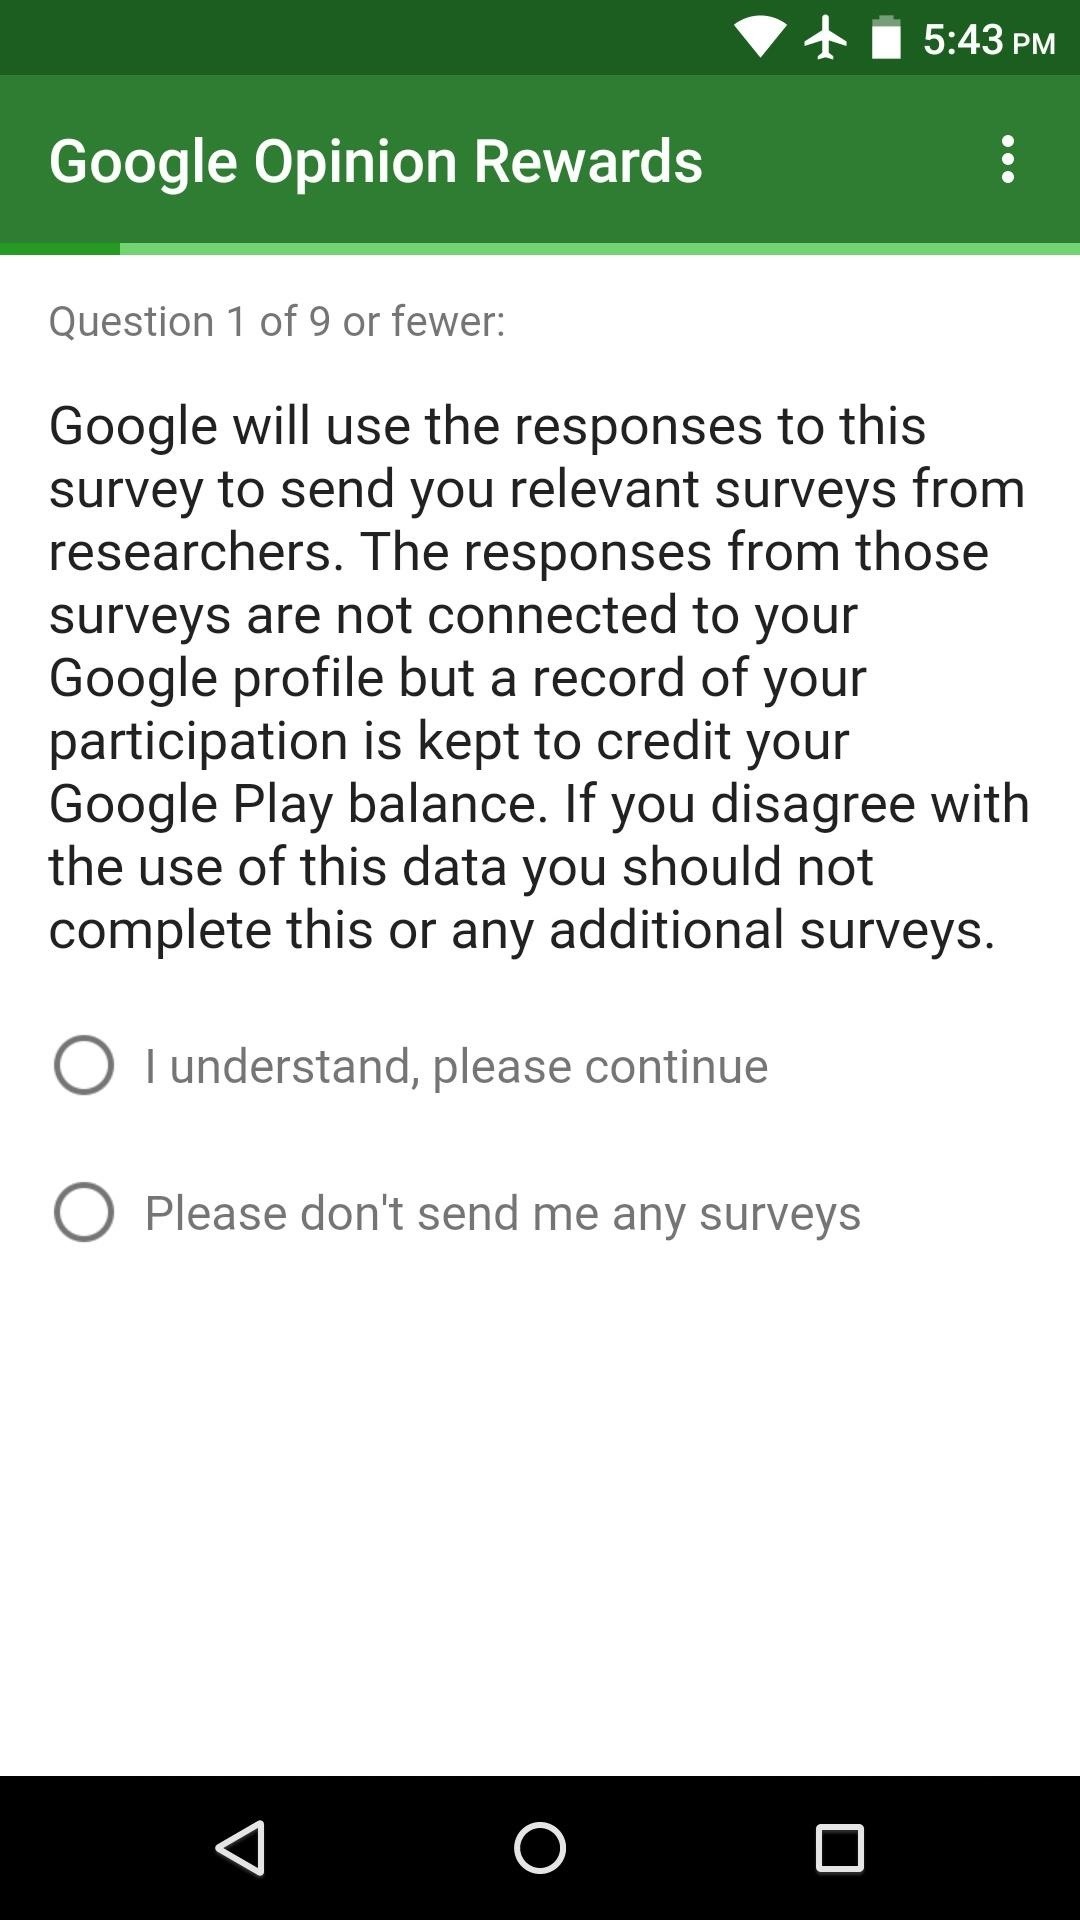 How to Earn Free Google Play Credits on Android by Filling Out Surveys